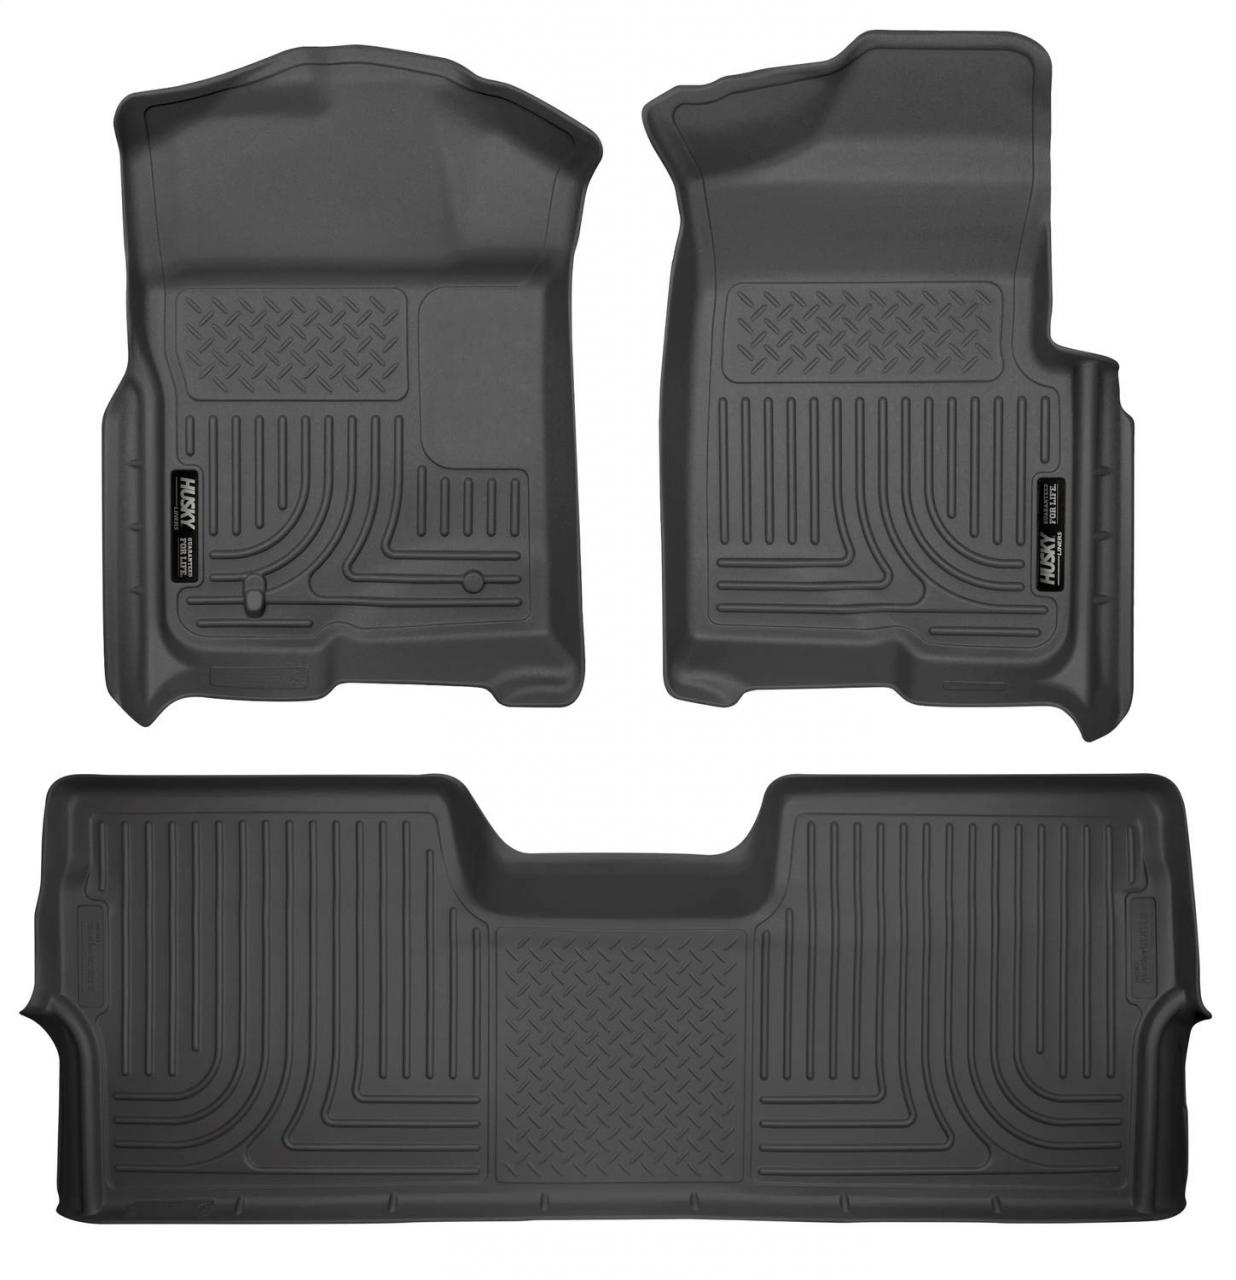 all goods are specials Husky Liners Front Floor Liners Fits 07-13 Wrangler  18021 high quality & fast shipping -sice-si.org